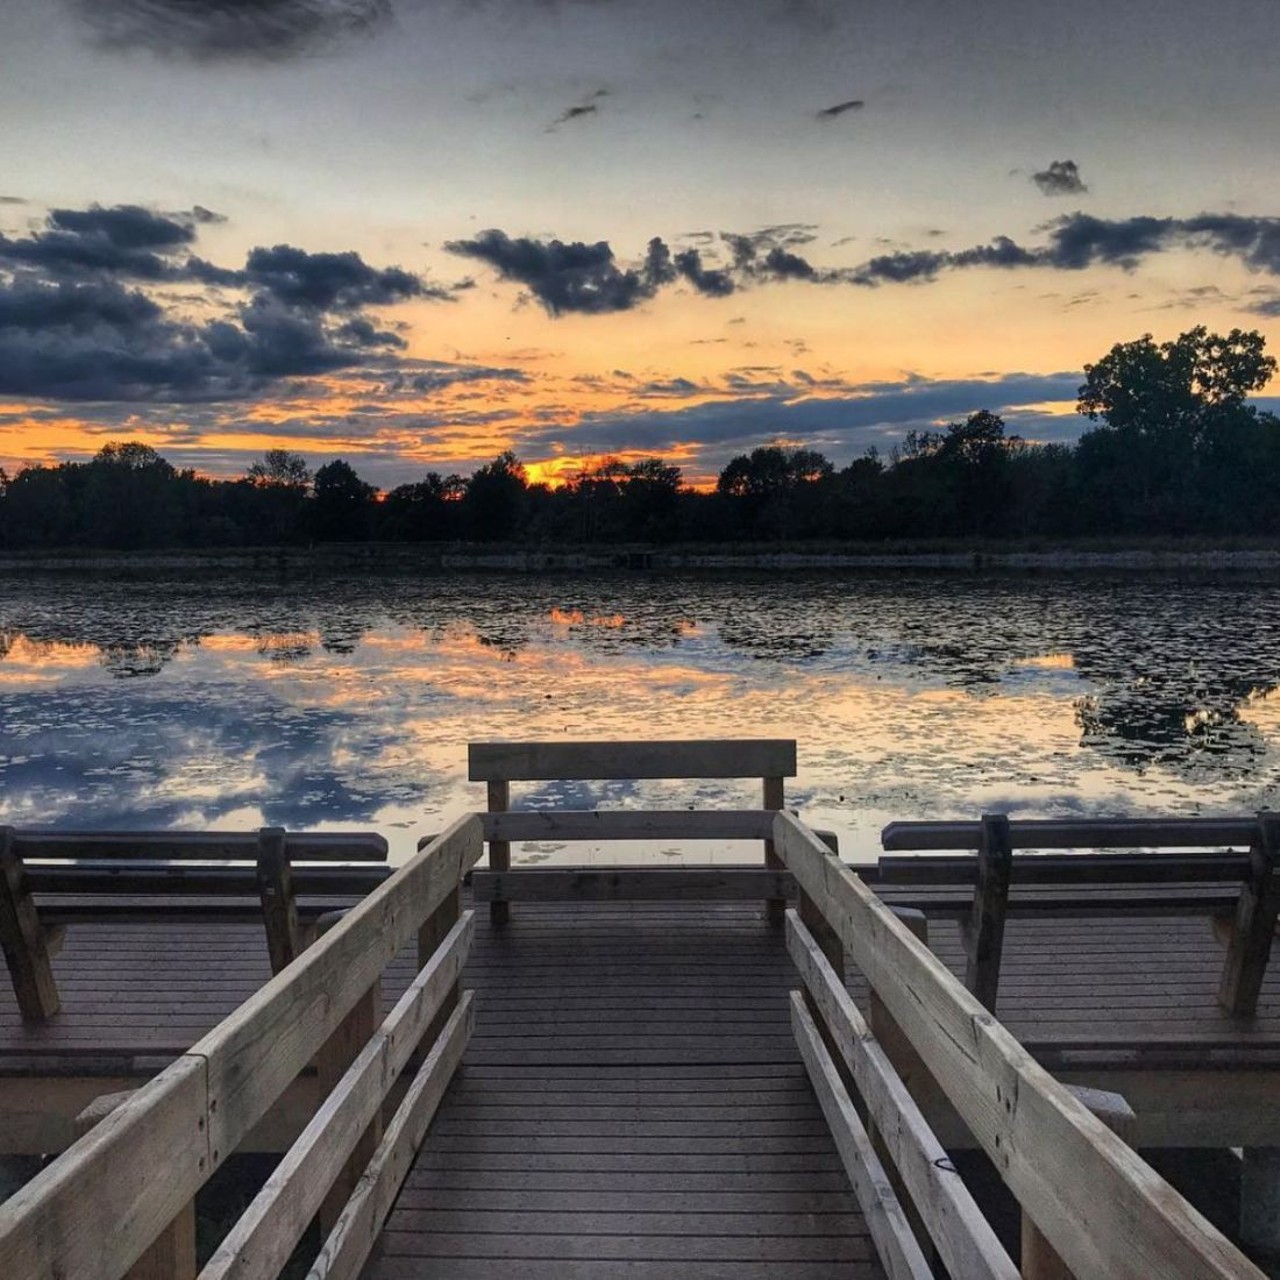  Walter Best Wildlife Preserve
11620 Ravenna Rd., 440-286-9516
This small preserve, part of the Geauga Park District, has areas for fishing, picnic tables and trails that run along Best Lake. Perfect for a quiet hike and an ideal spot to watch wildlife. 
Photo via _dez_/Instagram